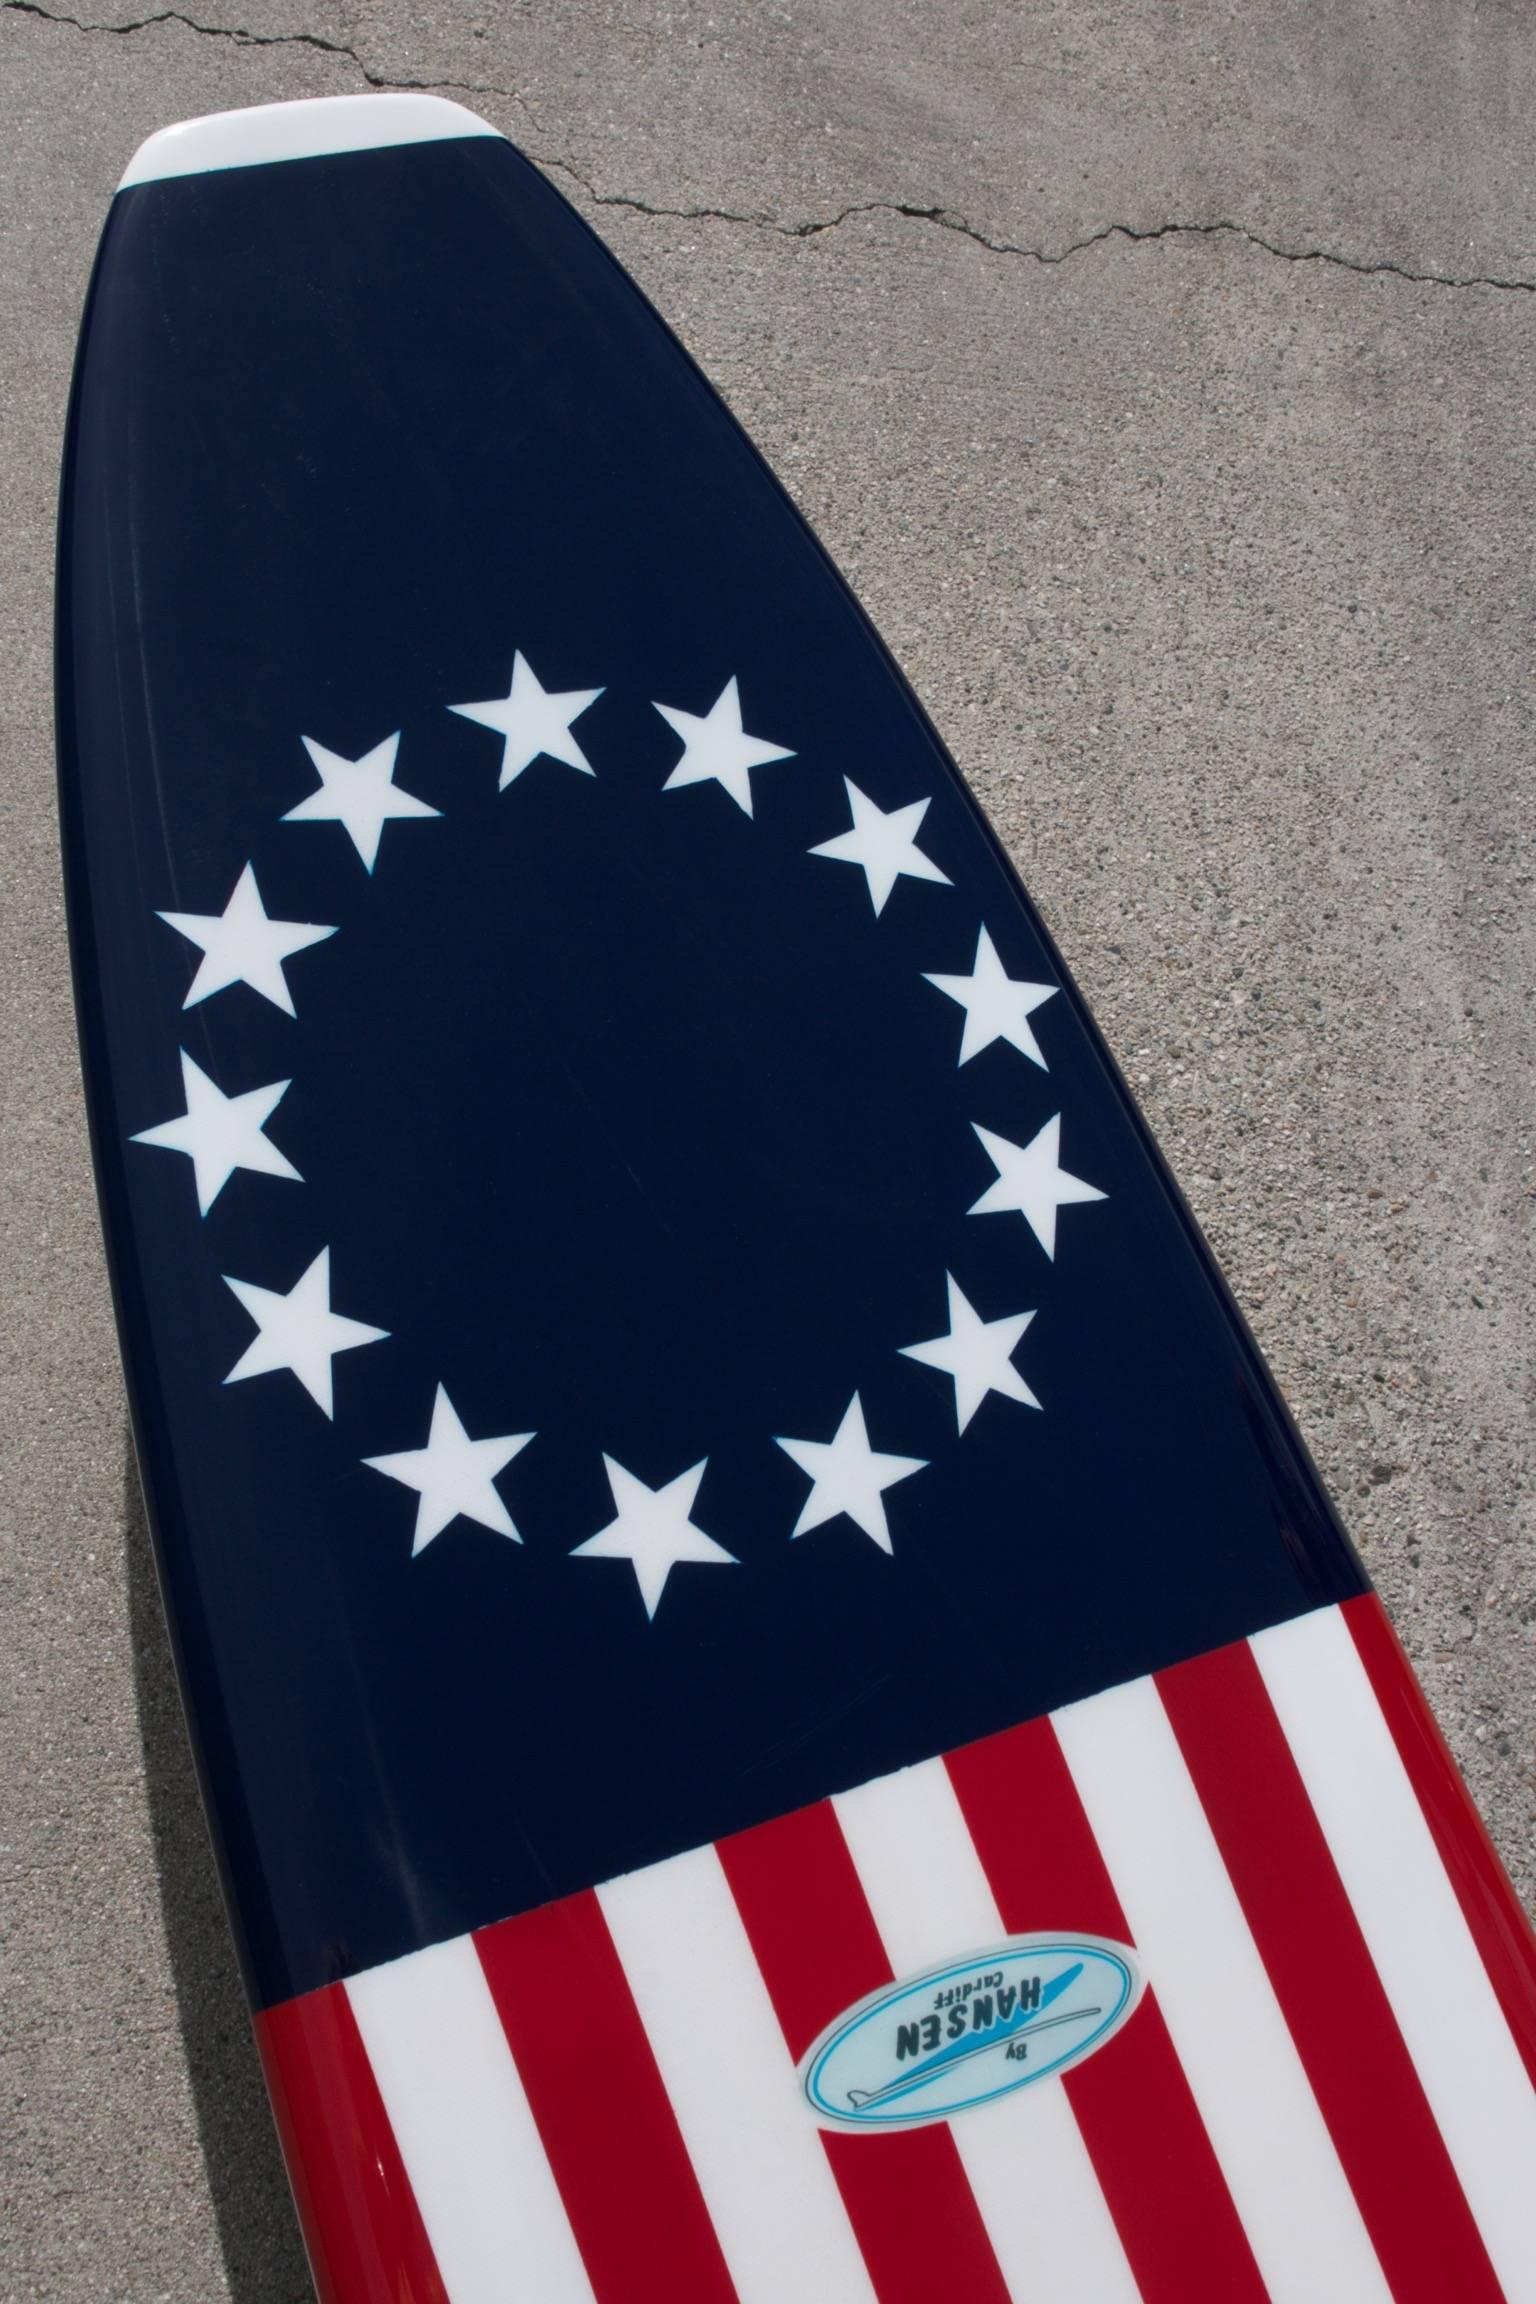 Foam Stars and Stripes, American Navy Flag Surfboard by Hanson, c 1962 Fully Restored